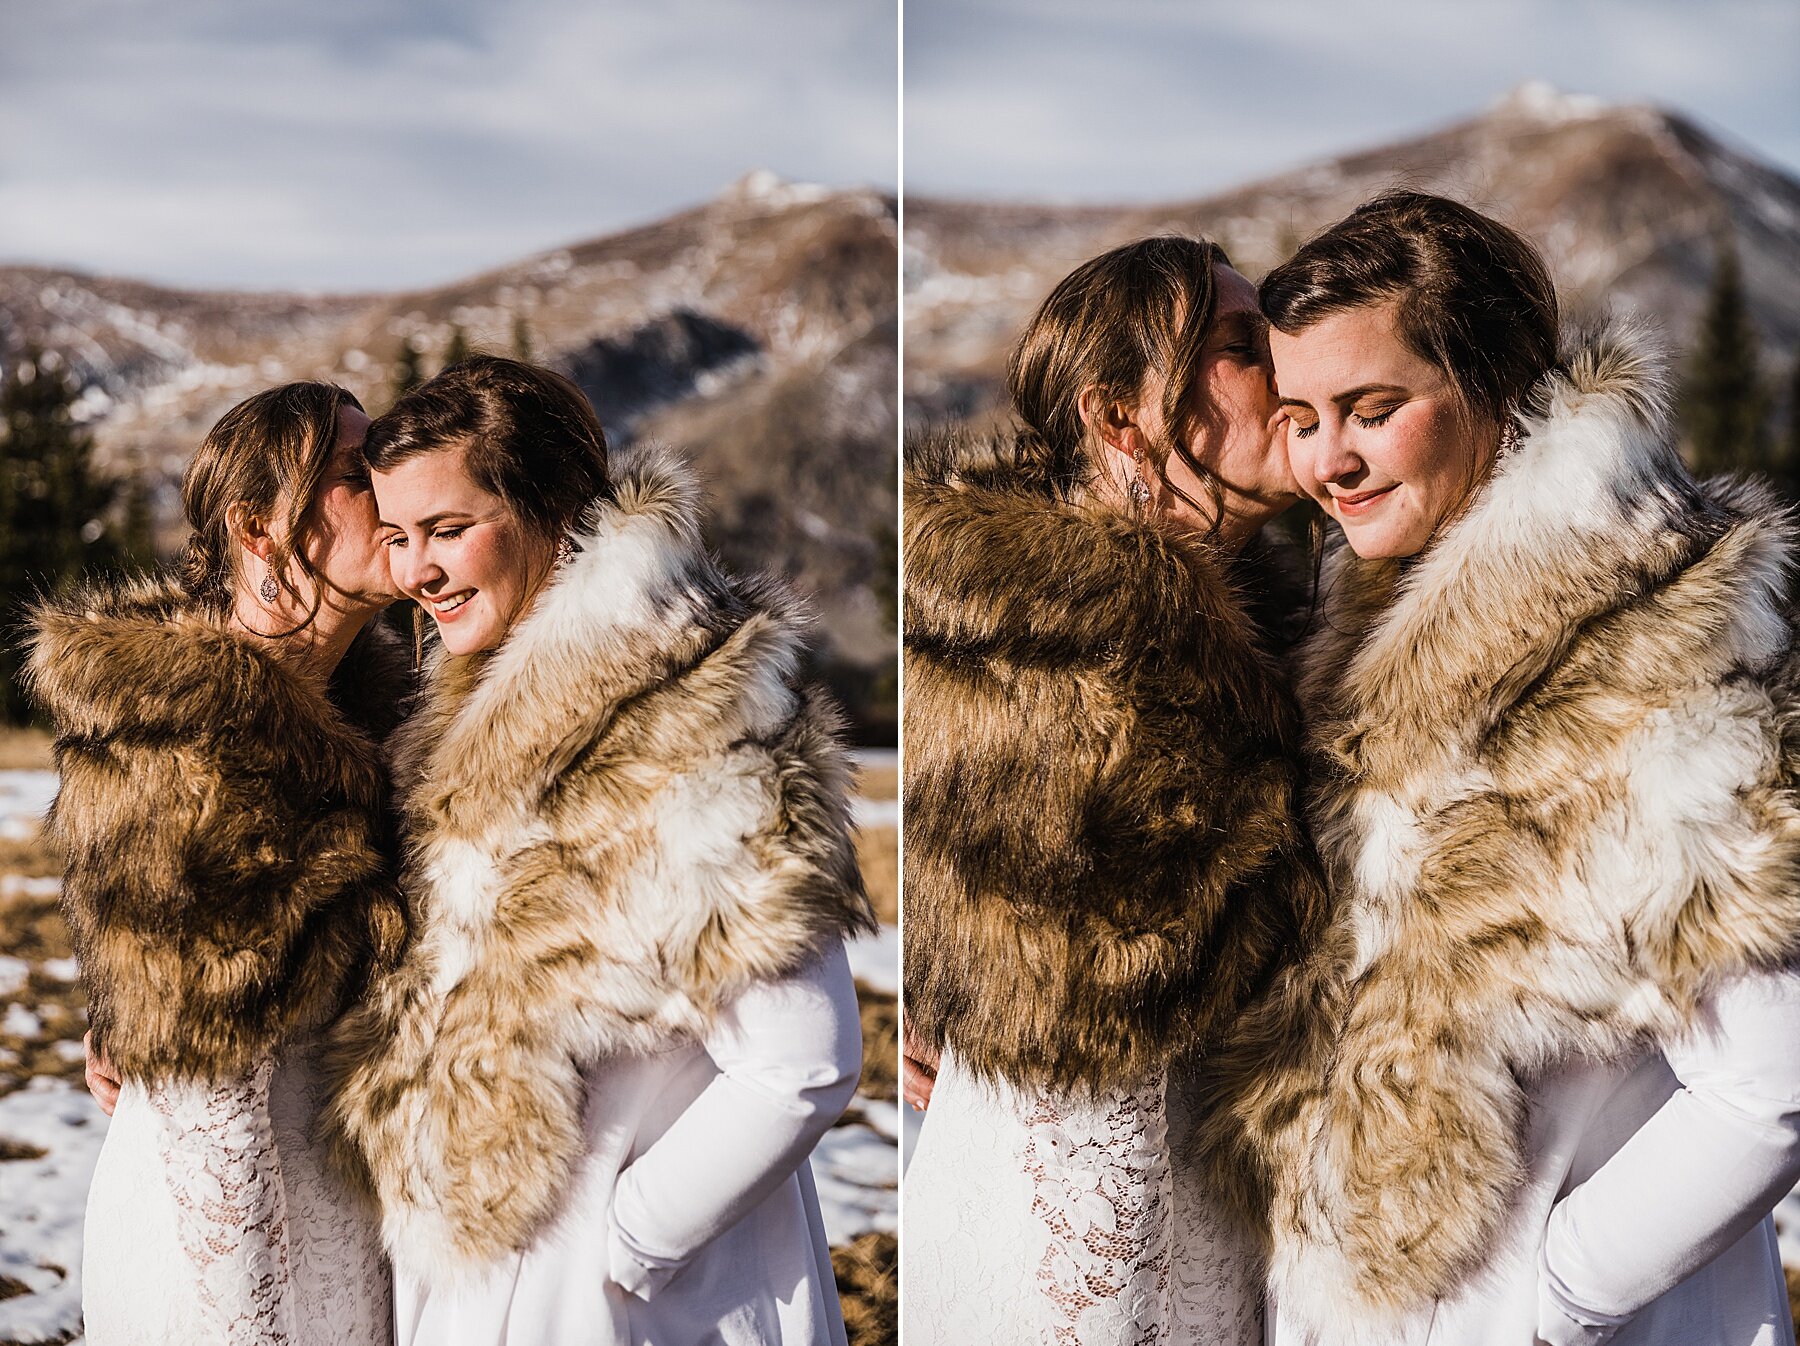 Sunrise Winter Elopement in Colorado | LGBTQ Elopement Photographer | Vow of the Wild